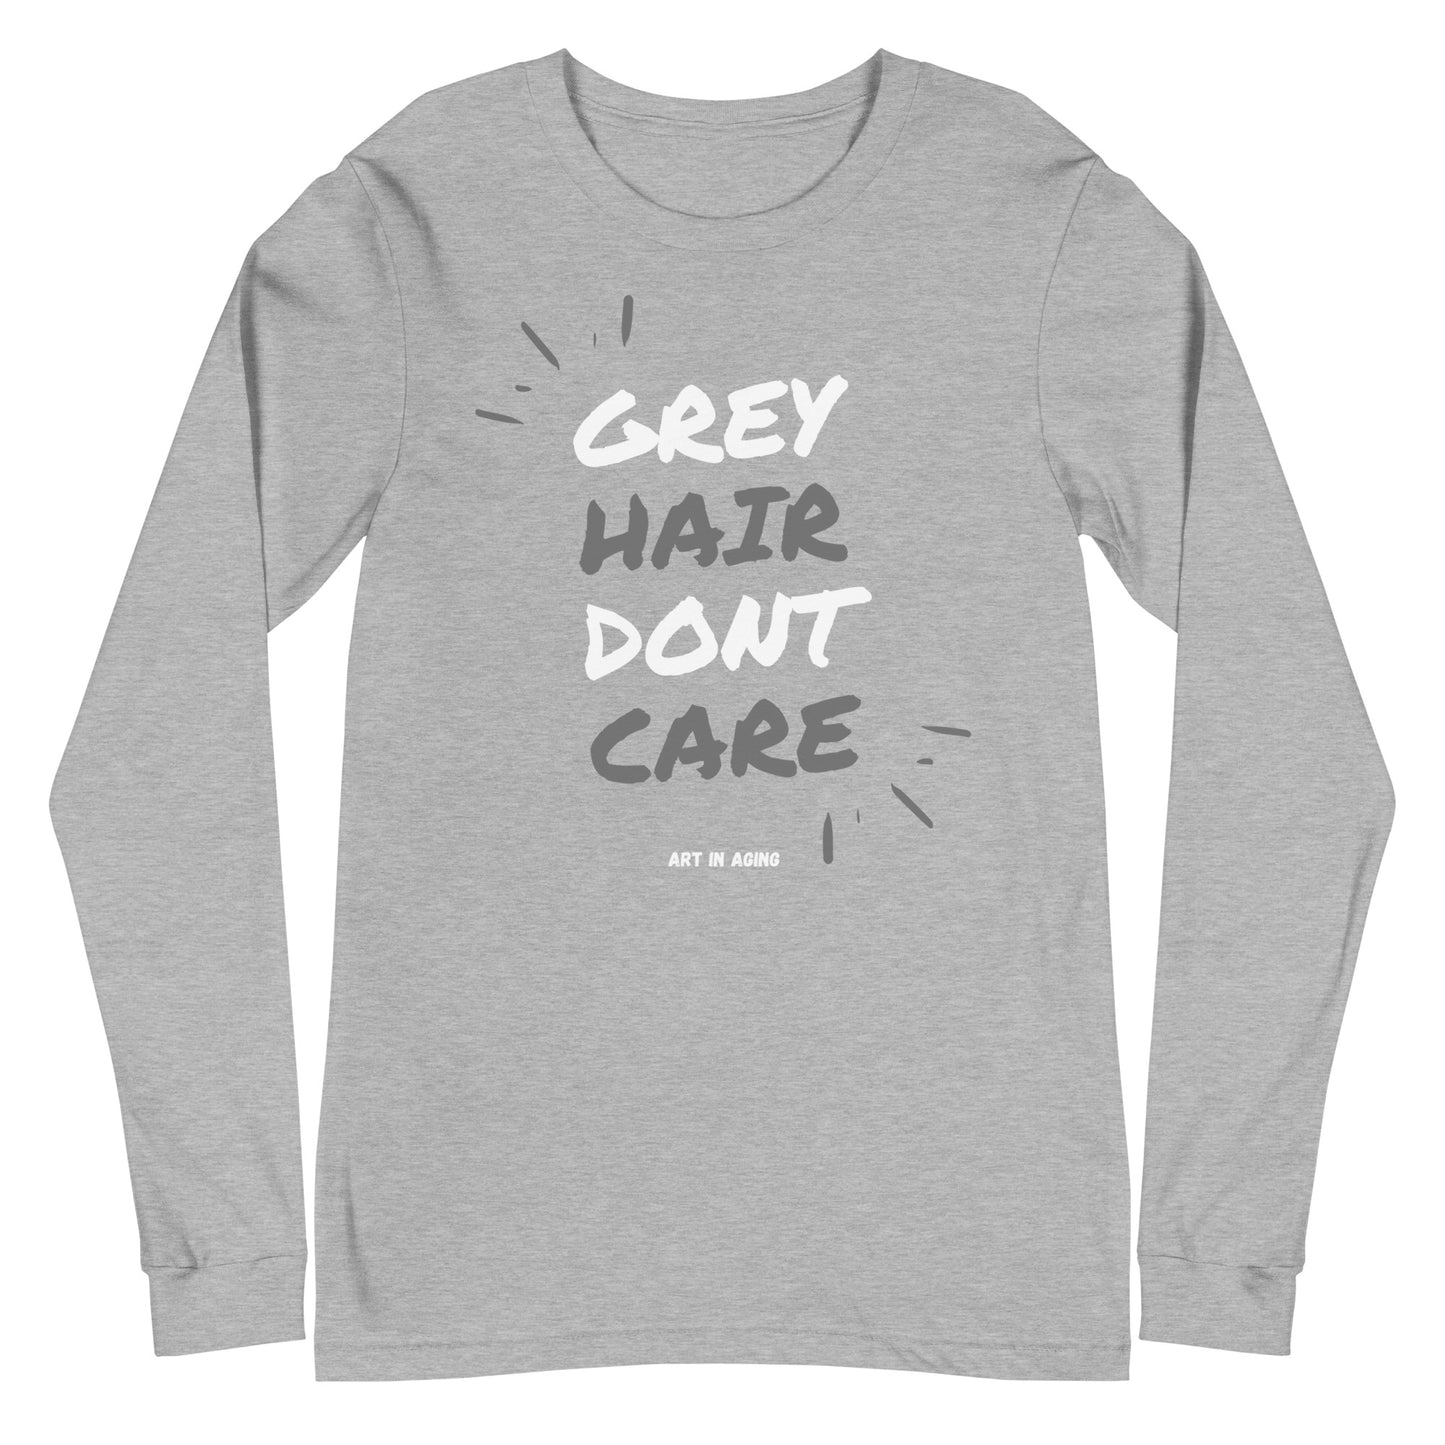 Grey Hair Don't Care Long Sleeve Shirt | Art in Aging